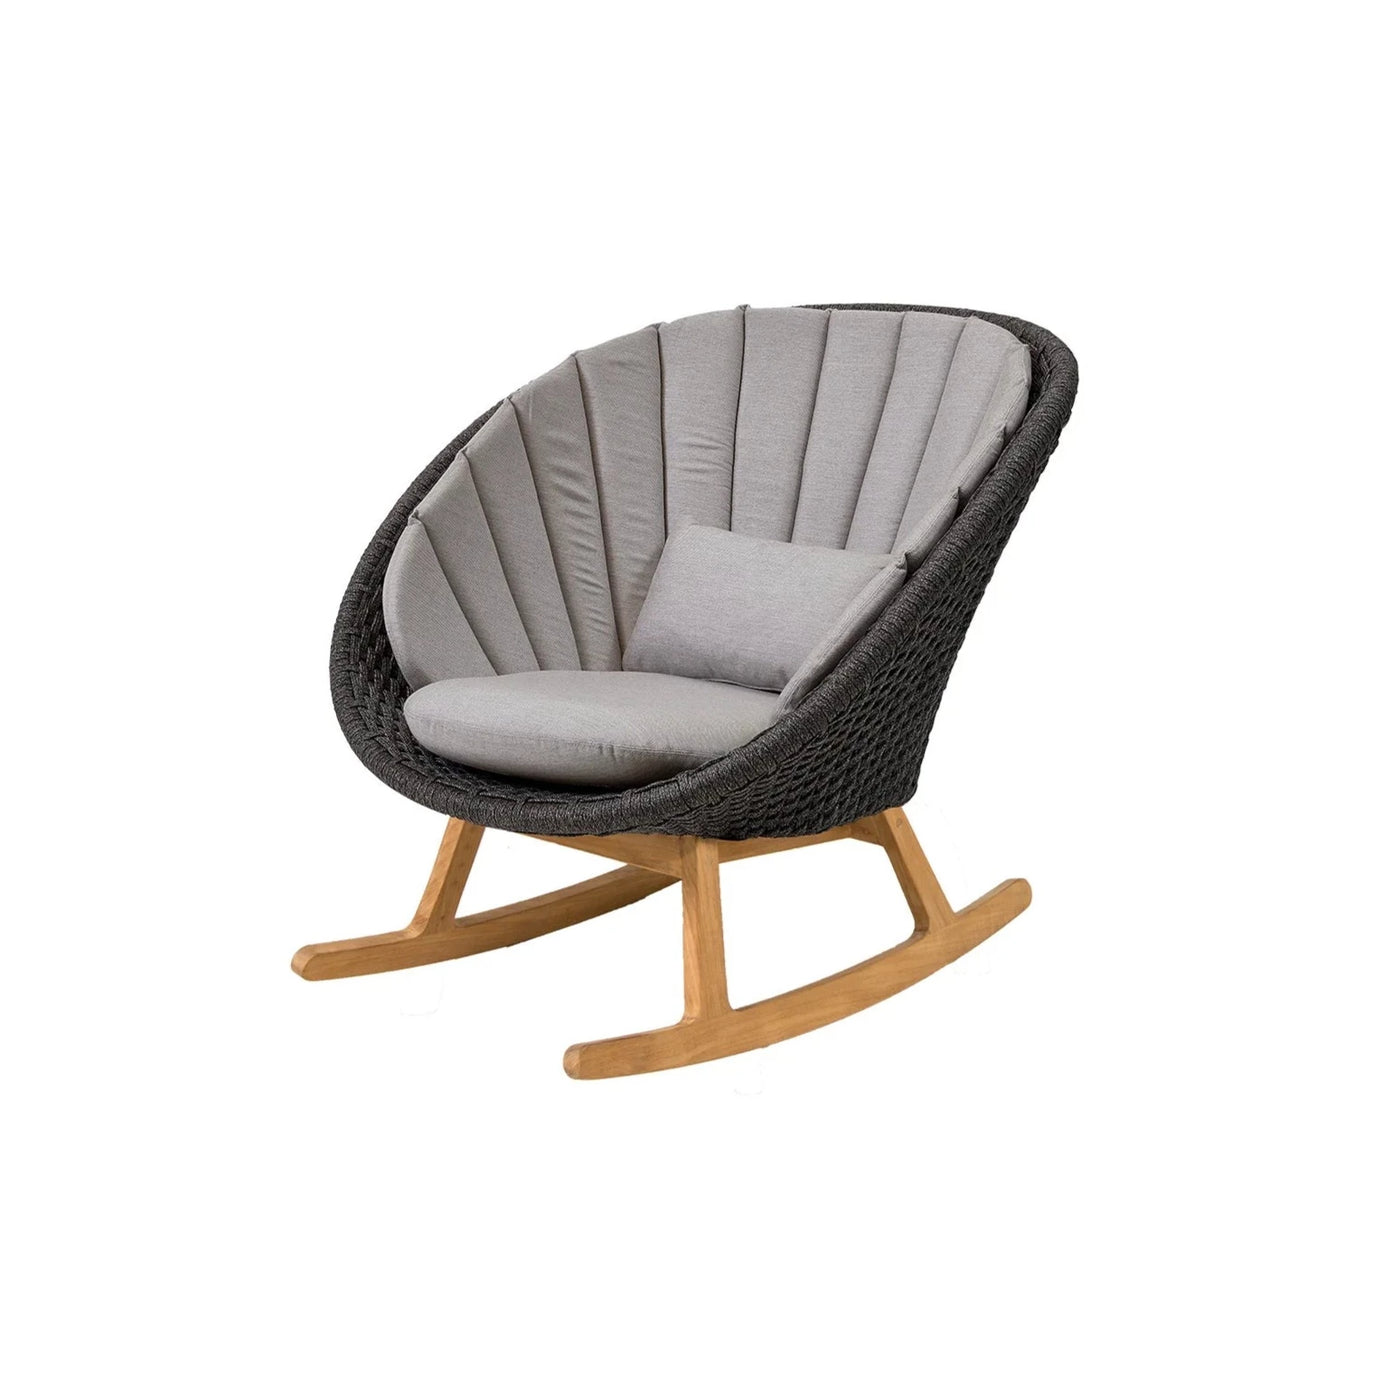 Peacock Outdoor Lounge Rocking Chair